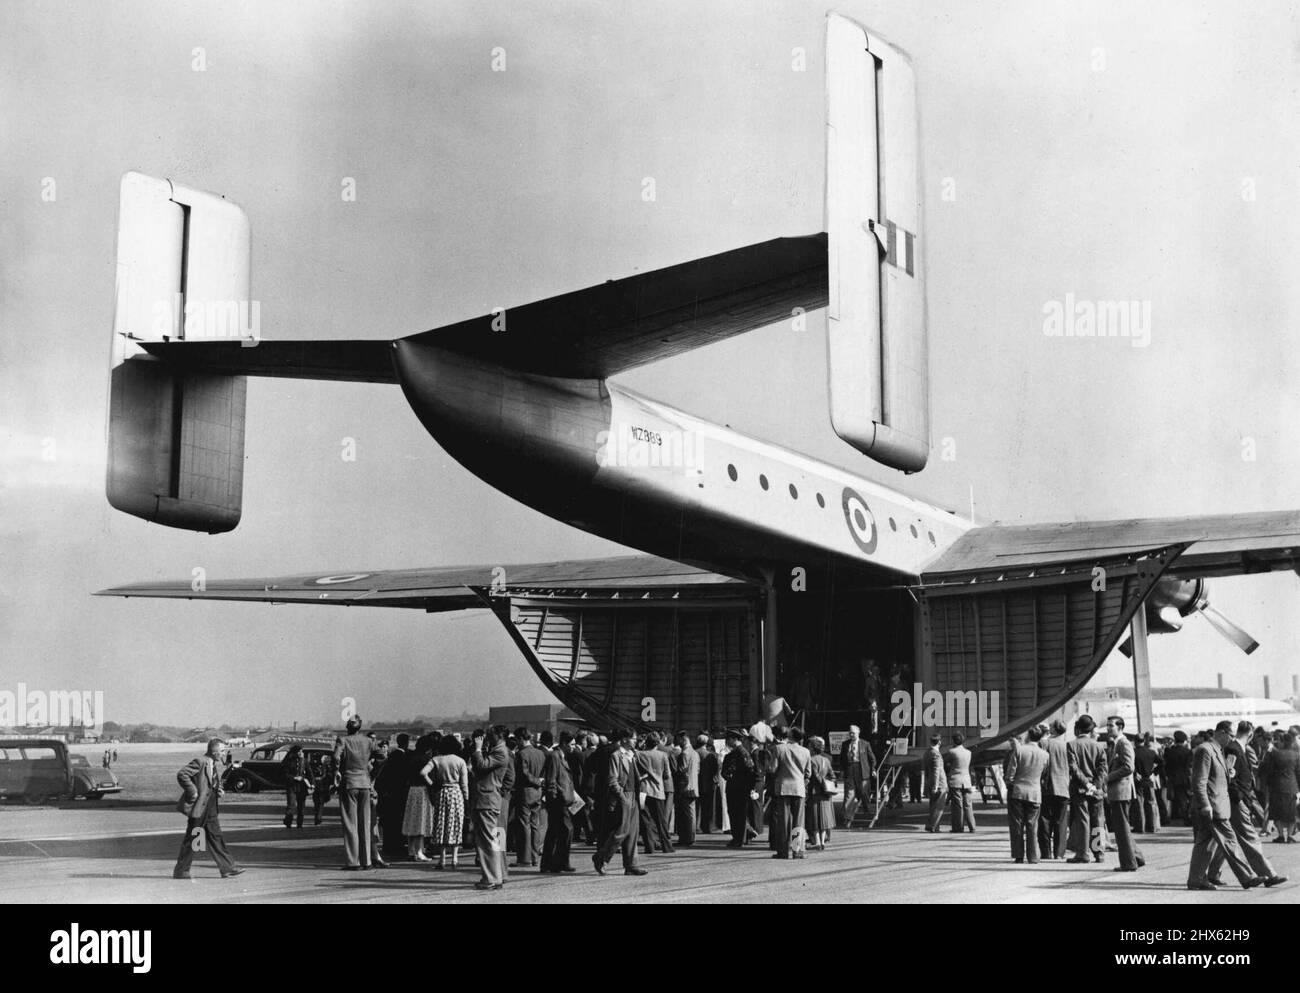 Flying Display And Exhibition Opens Today At Farnborough Aerodrome, Hants - Crowd queueing up to inspect the Blackburn General Aircraft Ltd. Prototype Beverley, a freighter, at the Exhibition today. Large crowds today attended the 1953 Flying Display and exhibition, showing the products of the Members of the Society of British Aircraft Constructors, which opened today at Farnborough Aerodrome, Hants. September 07, 1953. (Photo by Fox Photos). Stock Photo